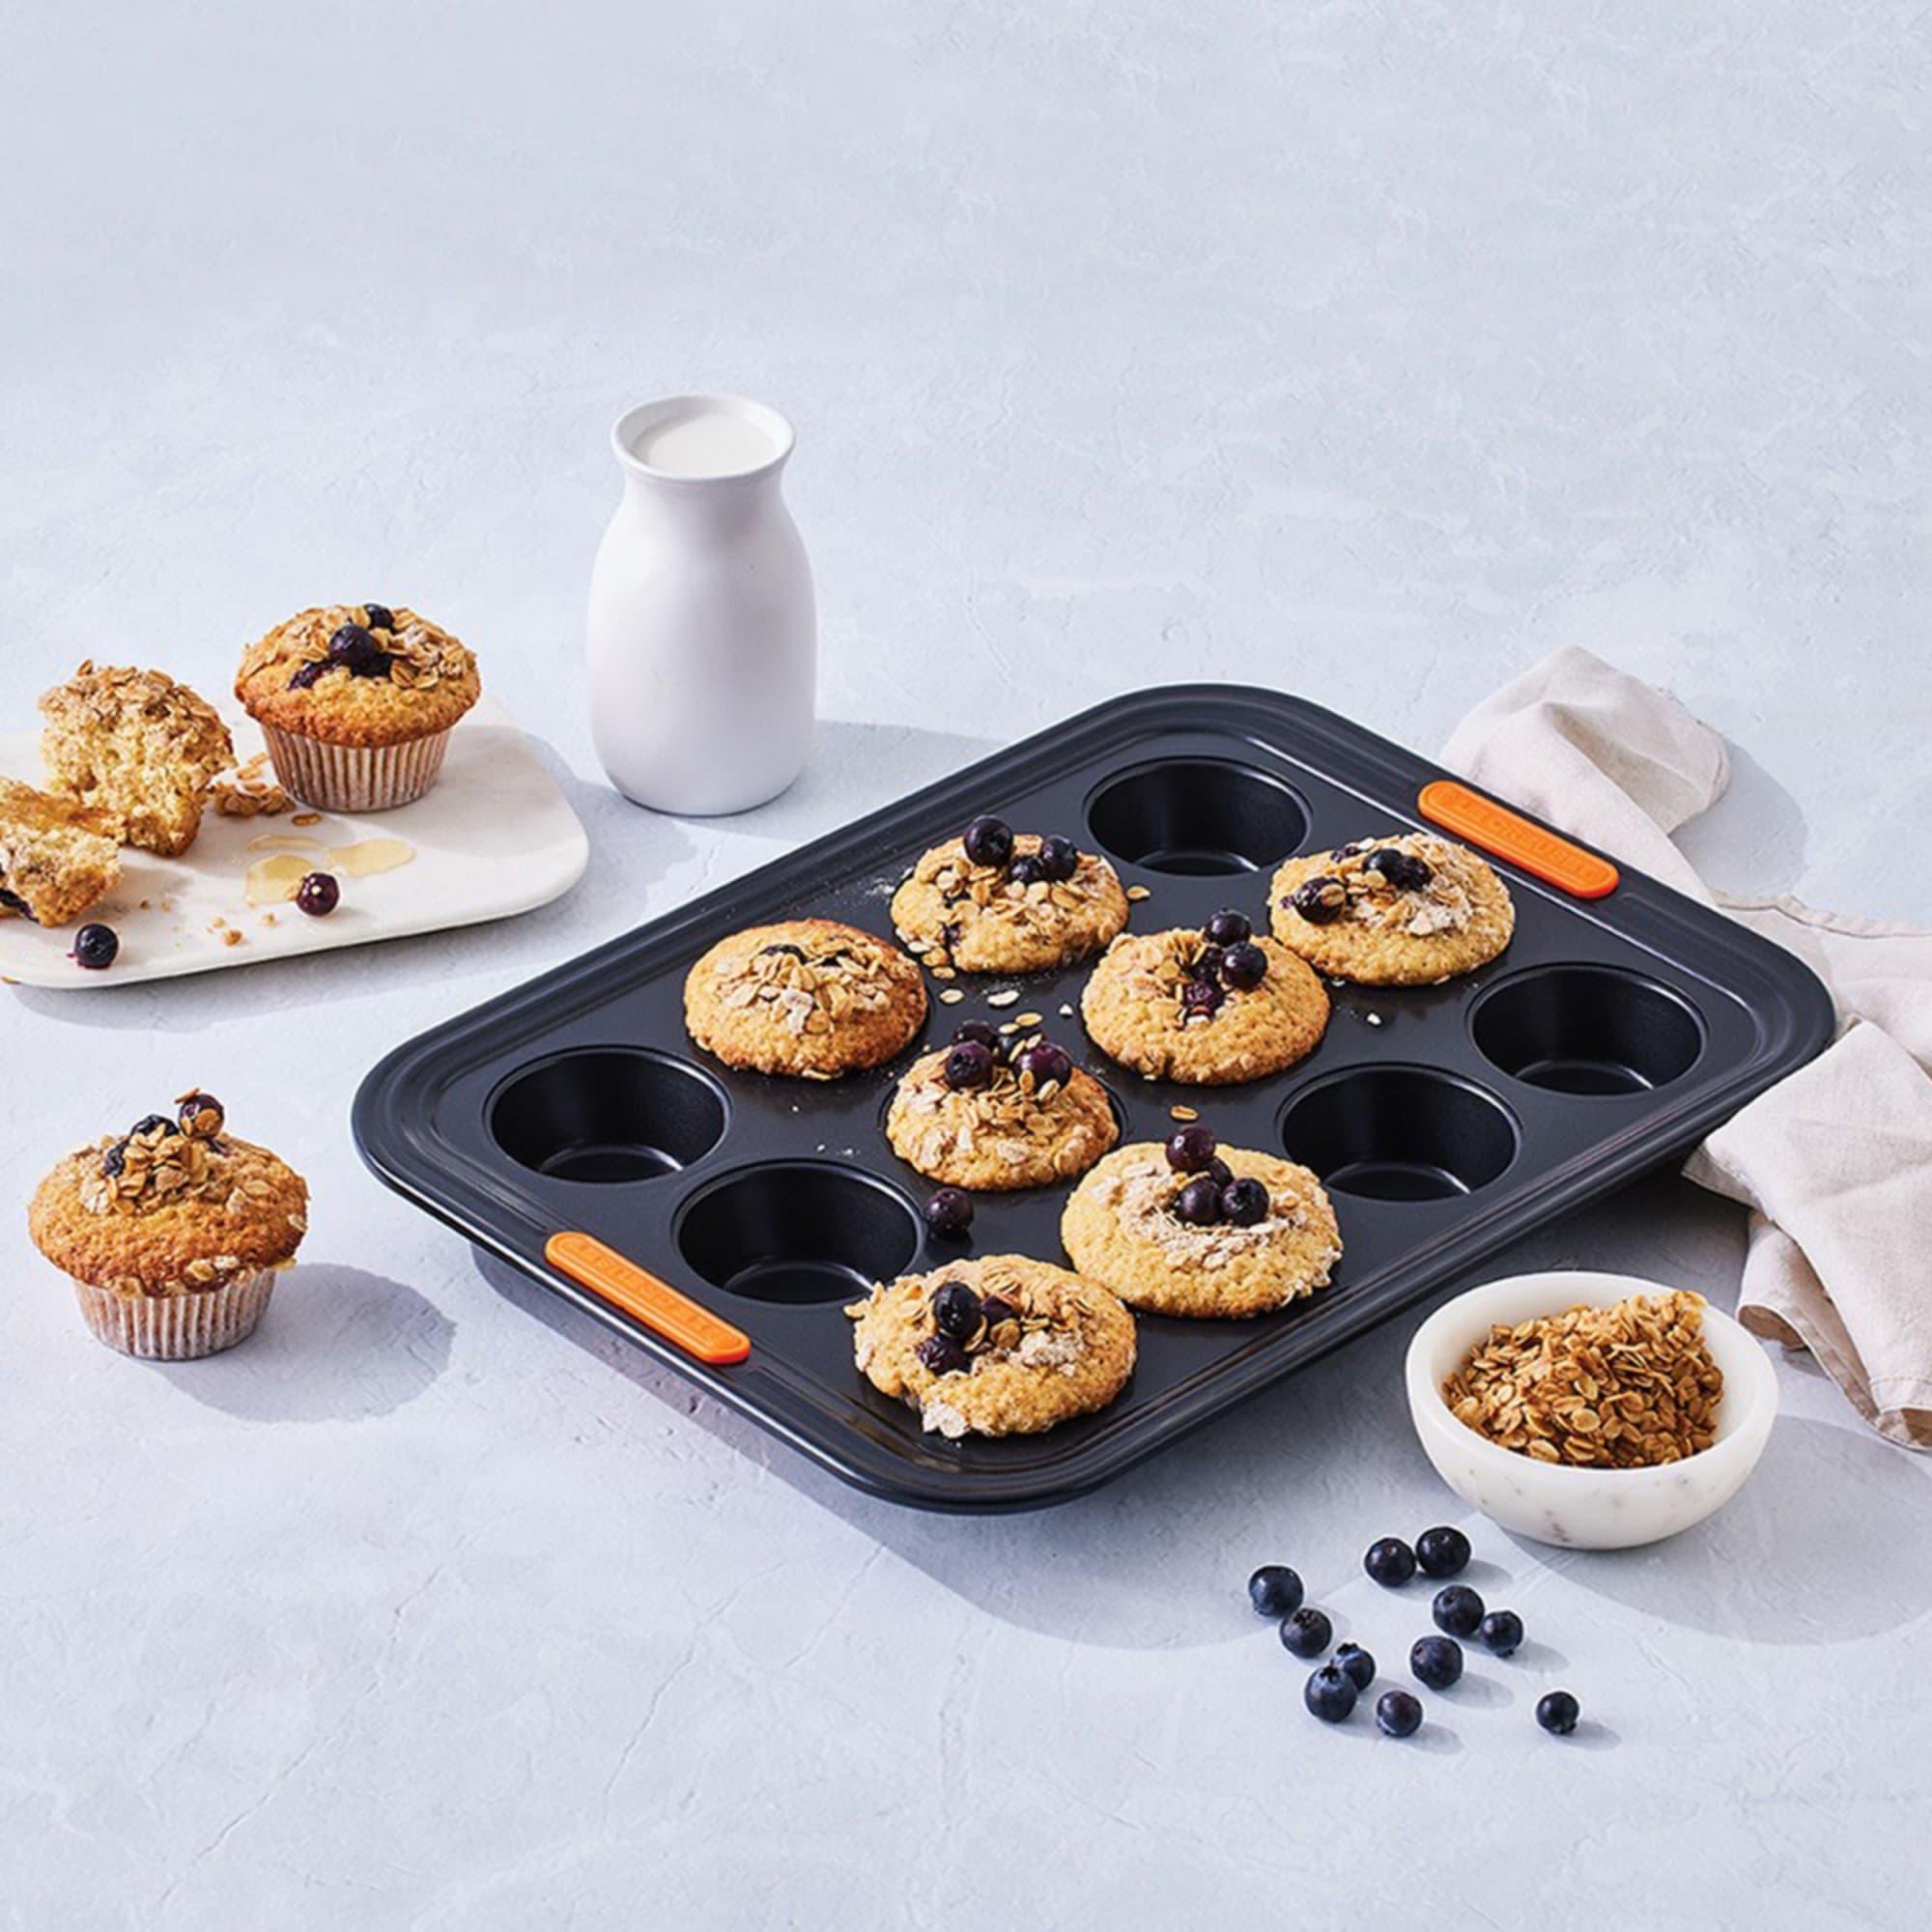 Le Creuset Toughened Non Stick Muffin Tray 12 Cup Image 4